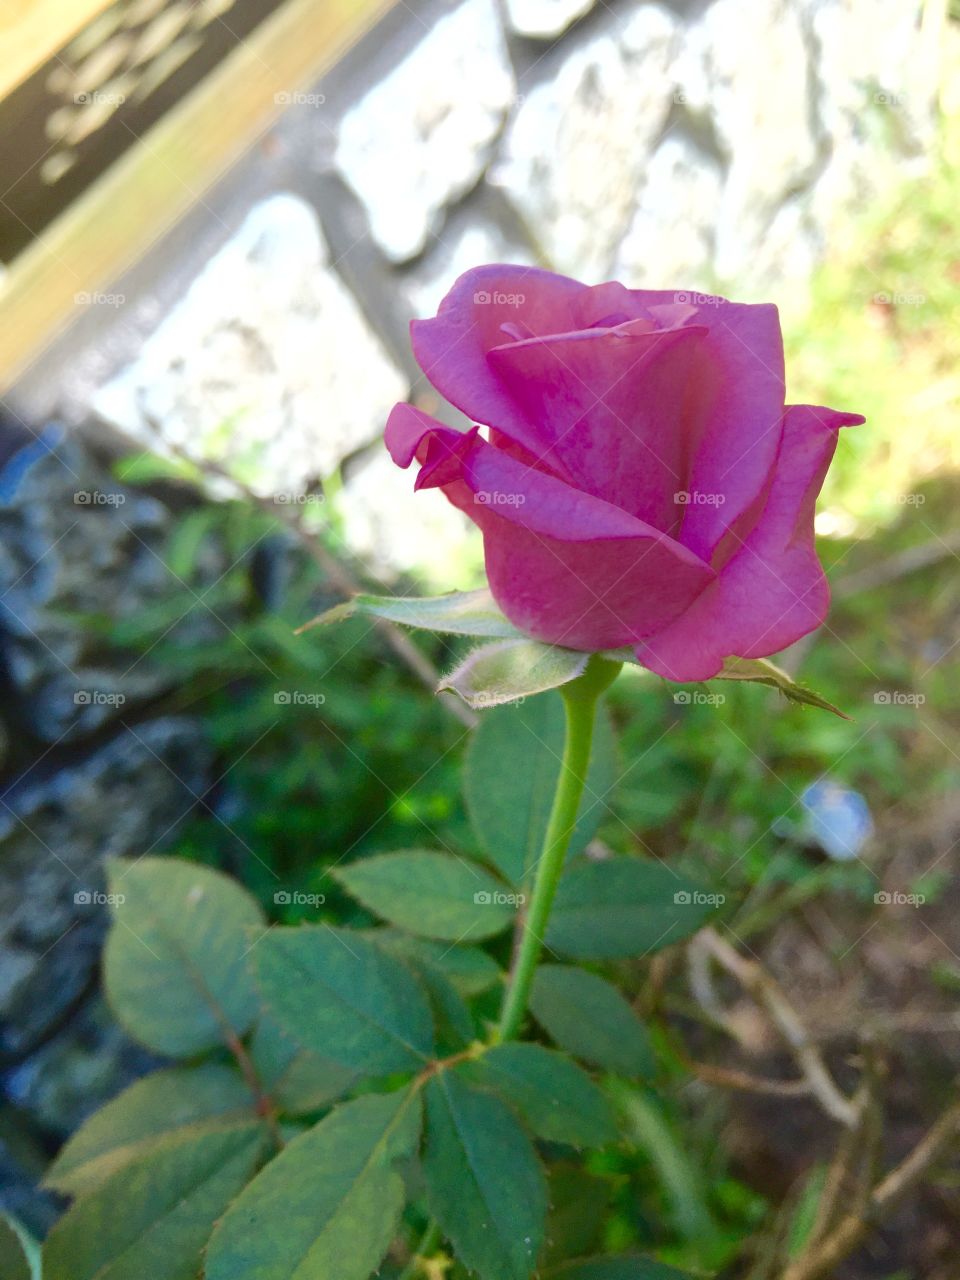 Pink Rose from my rose bush